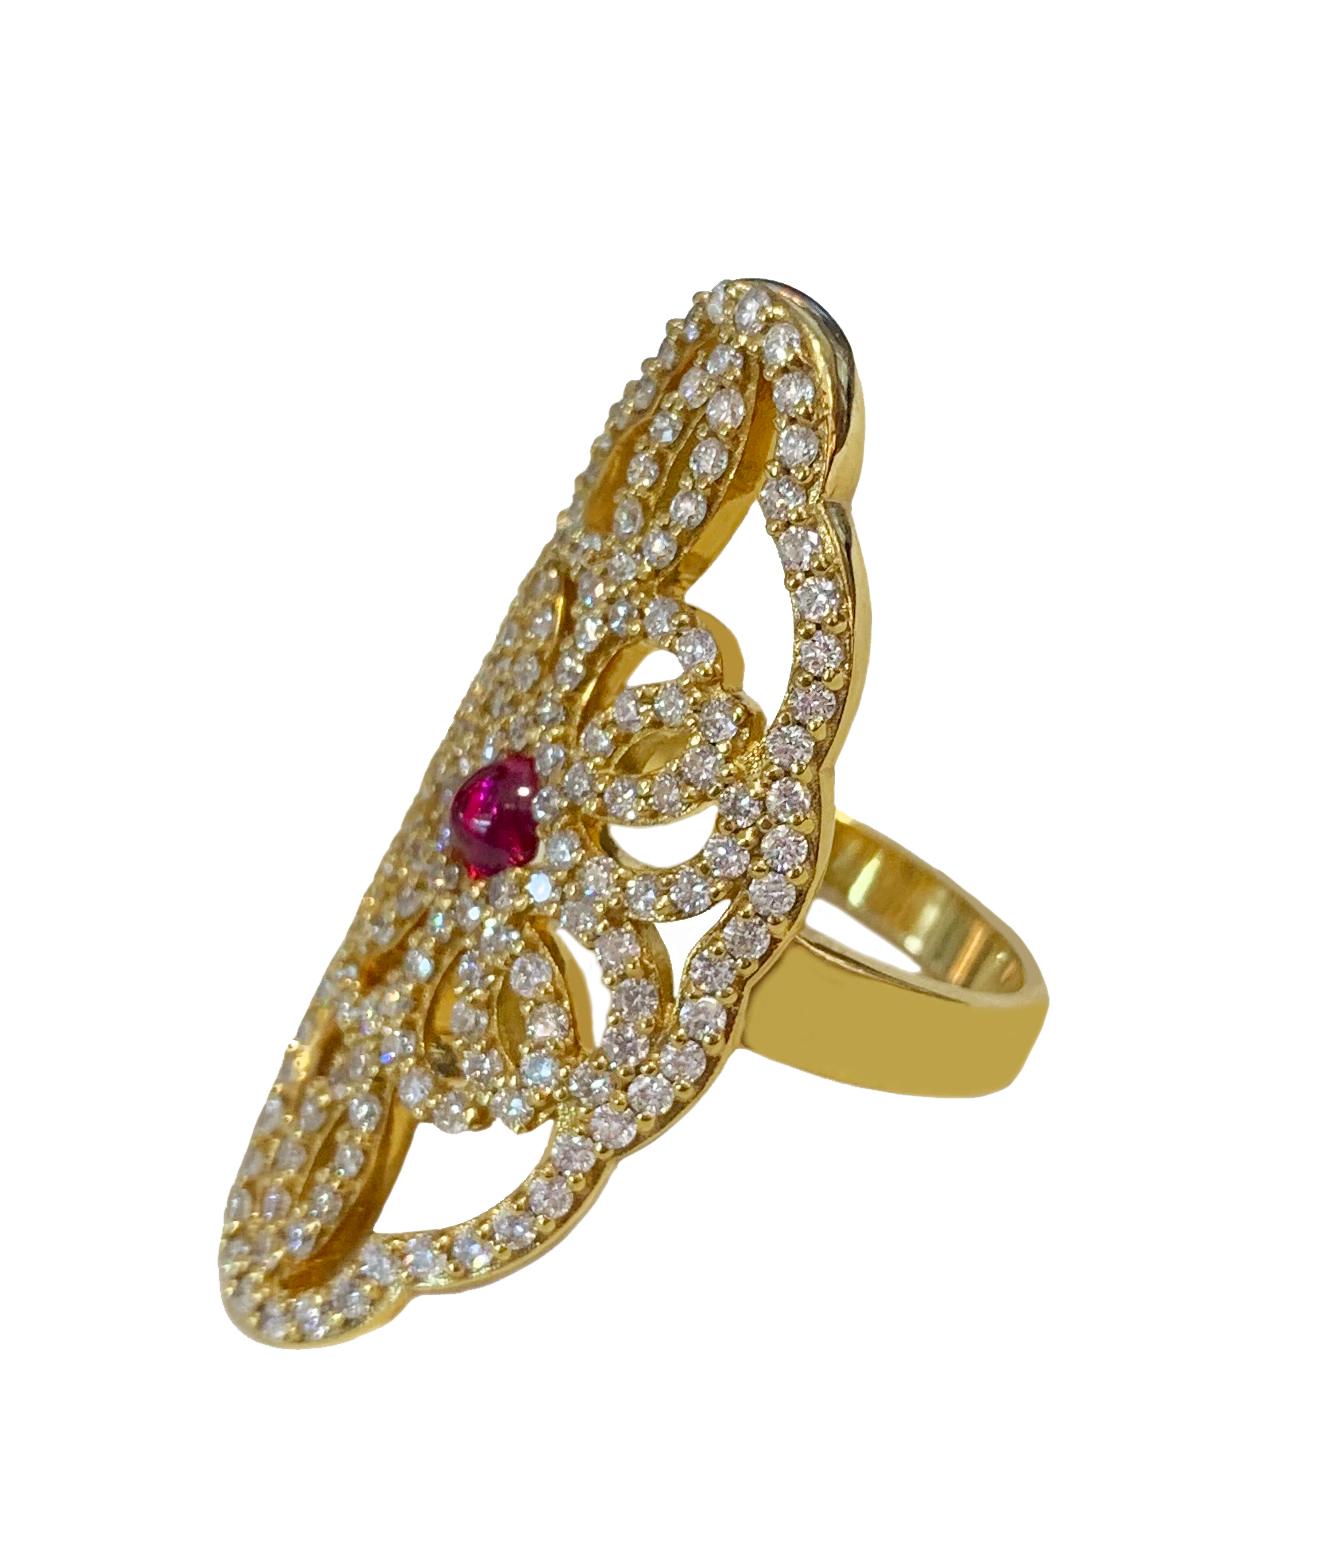 Material: 14k Yellow Gold 
Weight:10.6gr 
Stones: Diamond  and Ruby 
Diamonds: 2.5ct VS clarity G Color 
Ruby:0.30ct
Ring size :6.5
Ornament Dimension:36x18mm